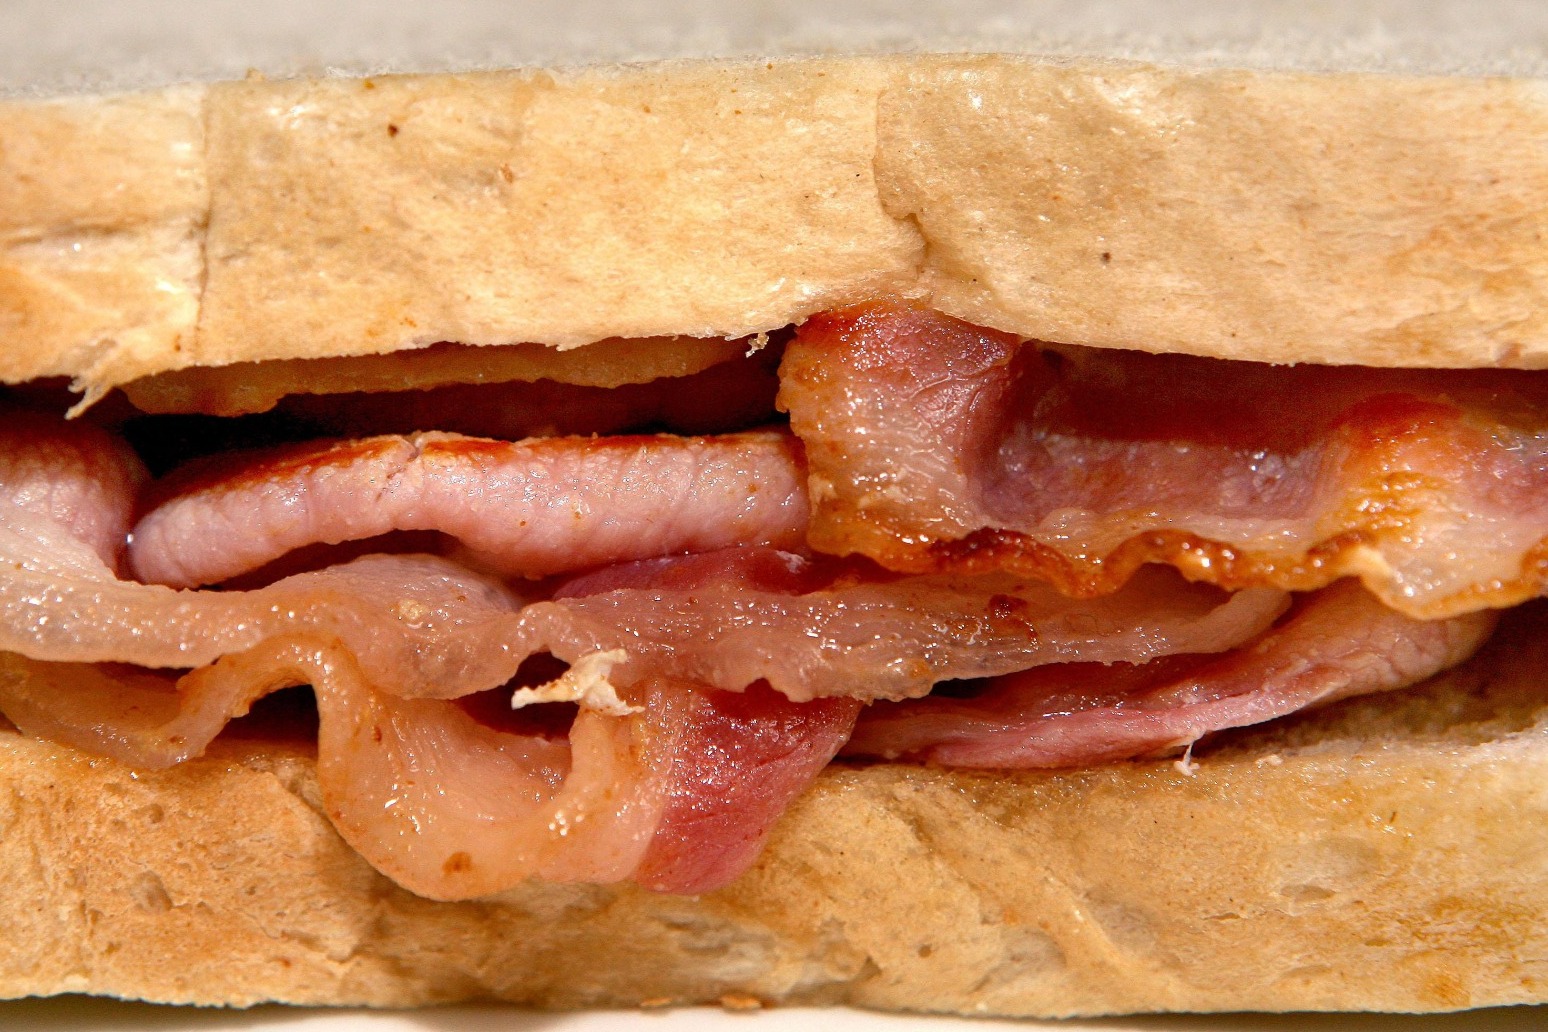 No need to cut down on bacon sandwiches, researchers say 